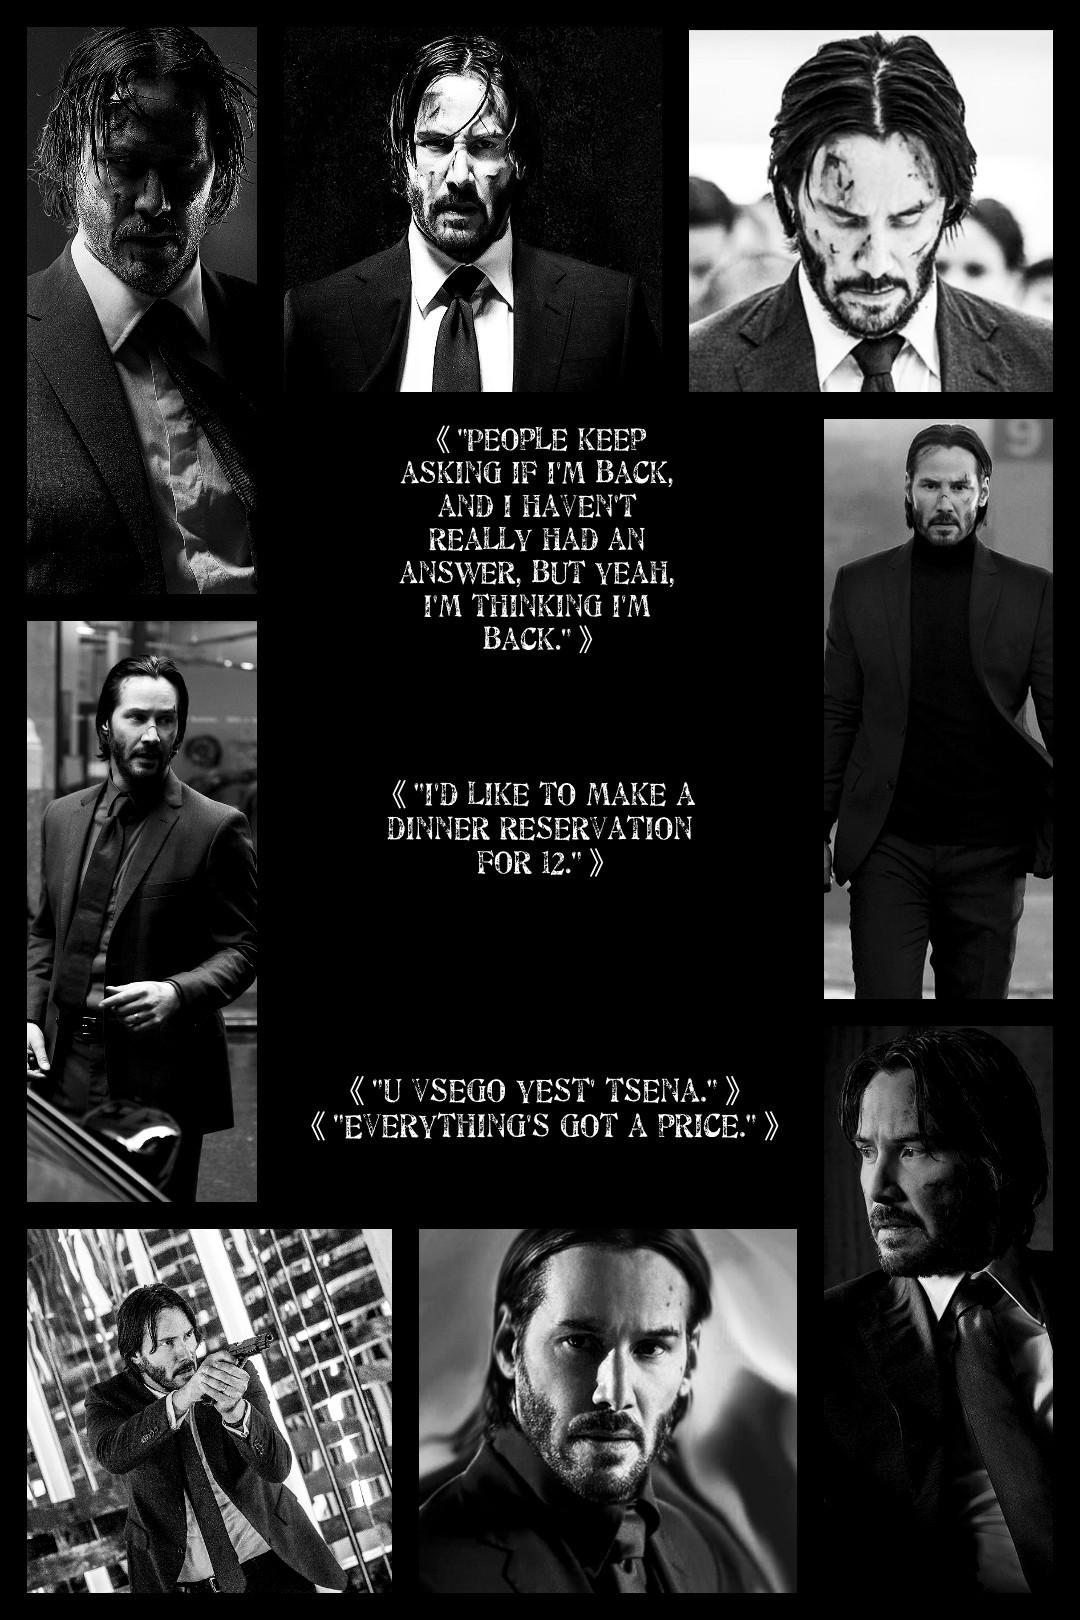 《°Tap°》
<<I made this because, John Wick: Chapter 3 is coming out, and John Wick deserves some love. After all, he lost his wife, and two days later he lost his precious beagle.>>